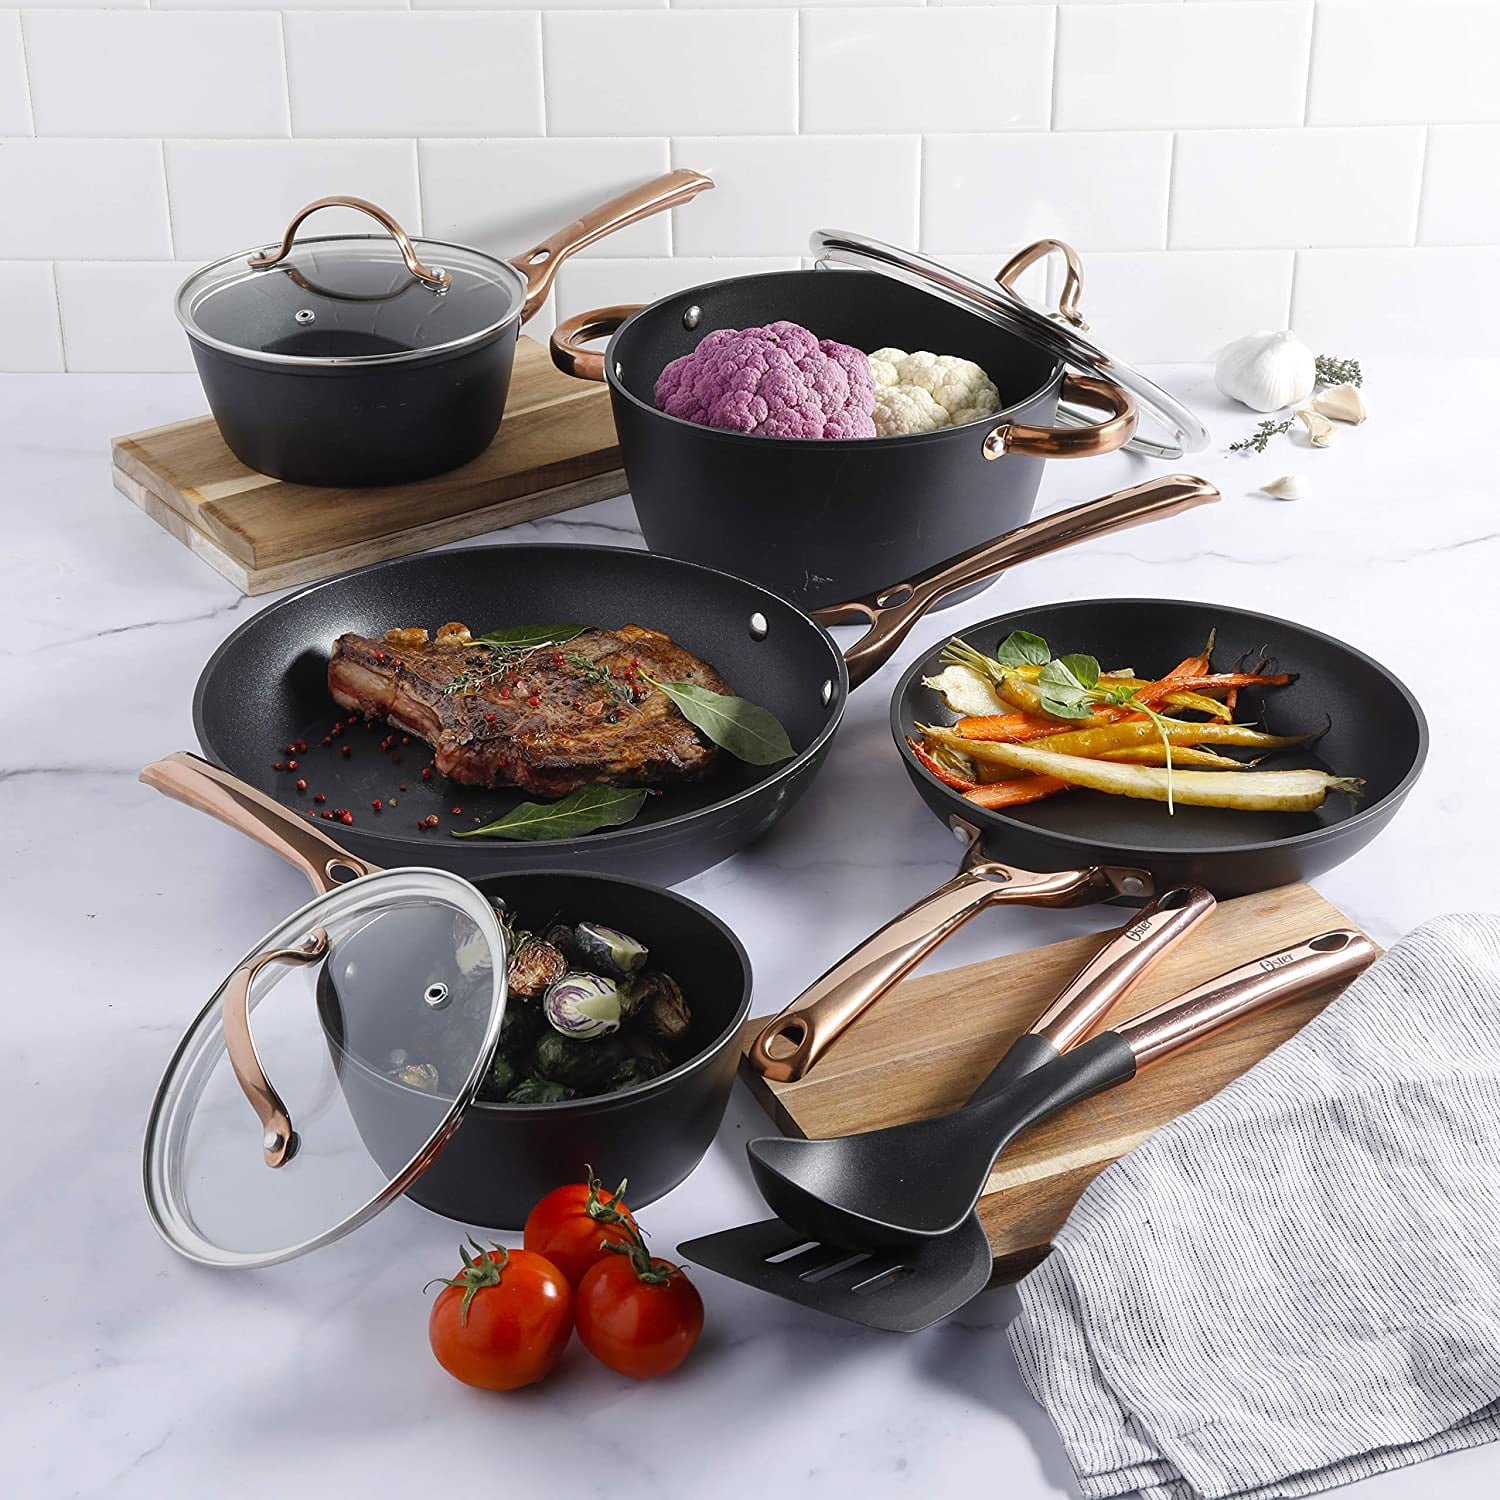 Oster 10-Piece Non-Stick Aluminum Cookware Set in Black and Grey